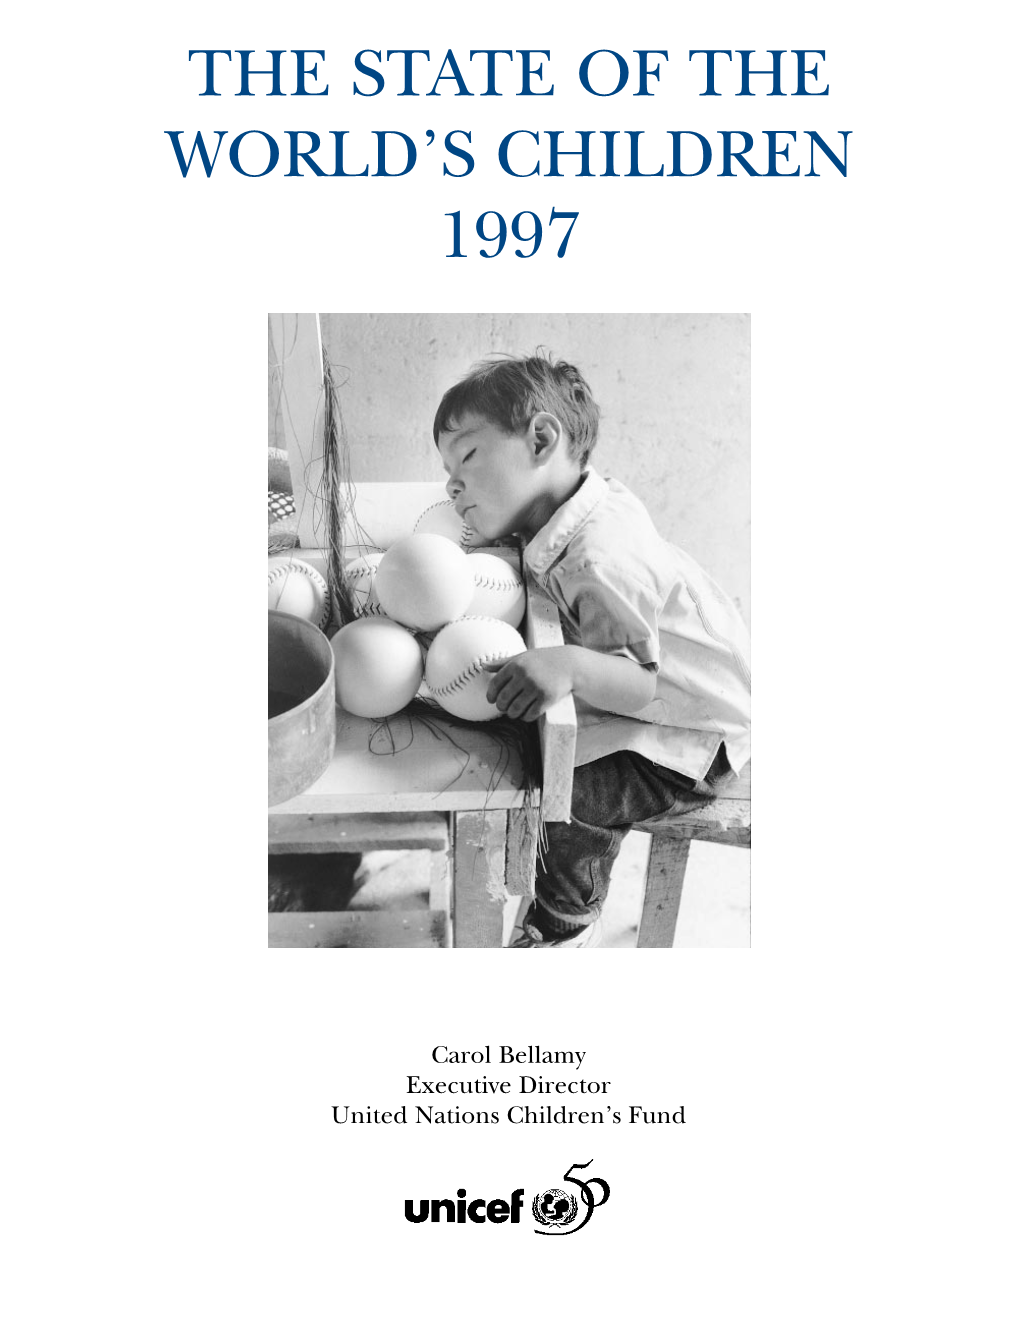 The State of the World's Children 1997